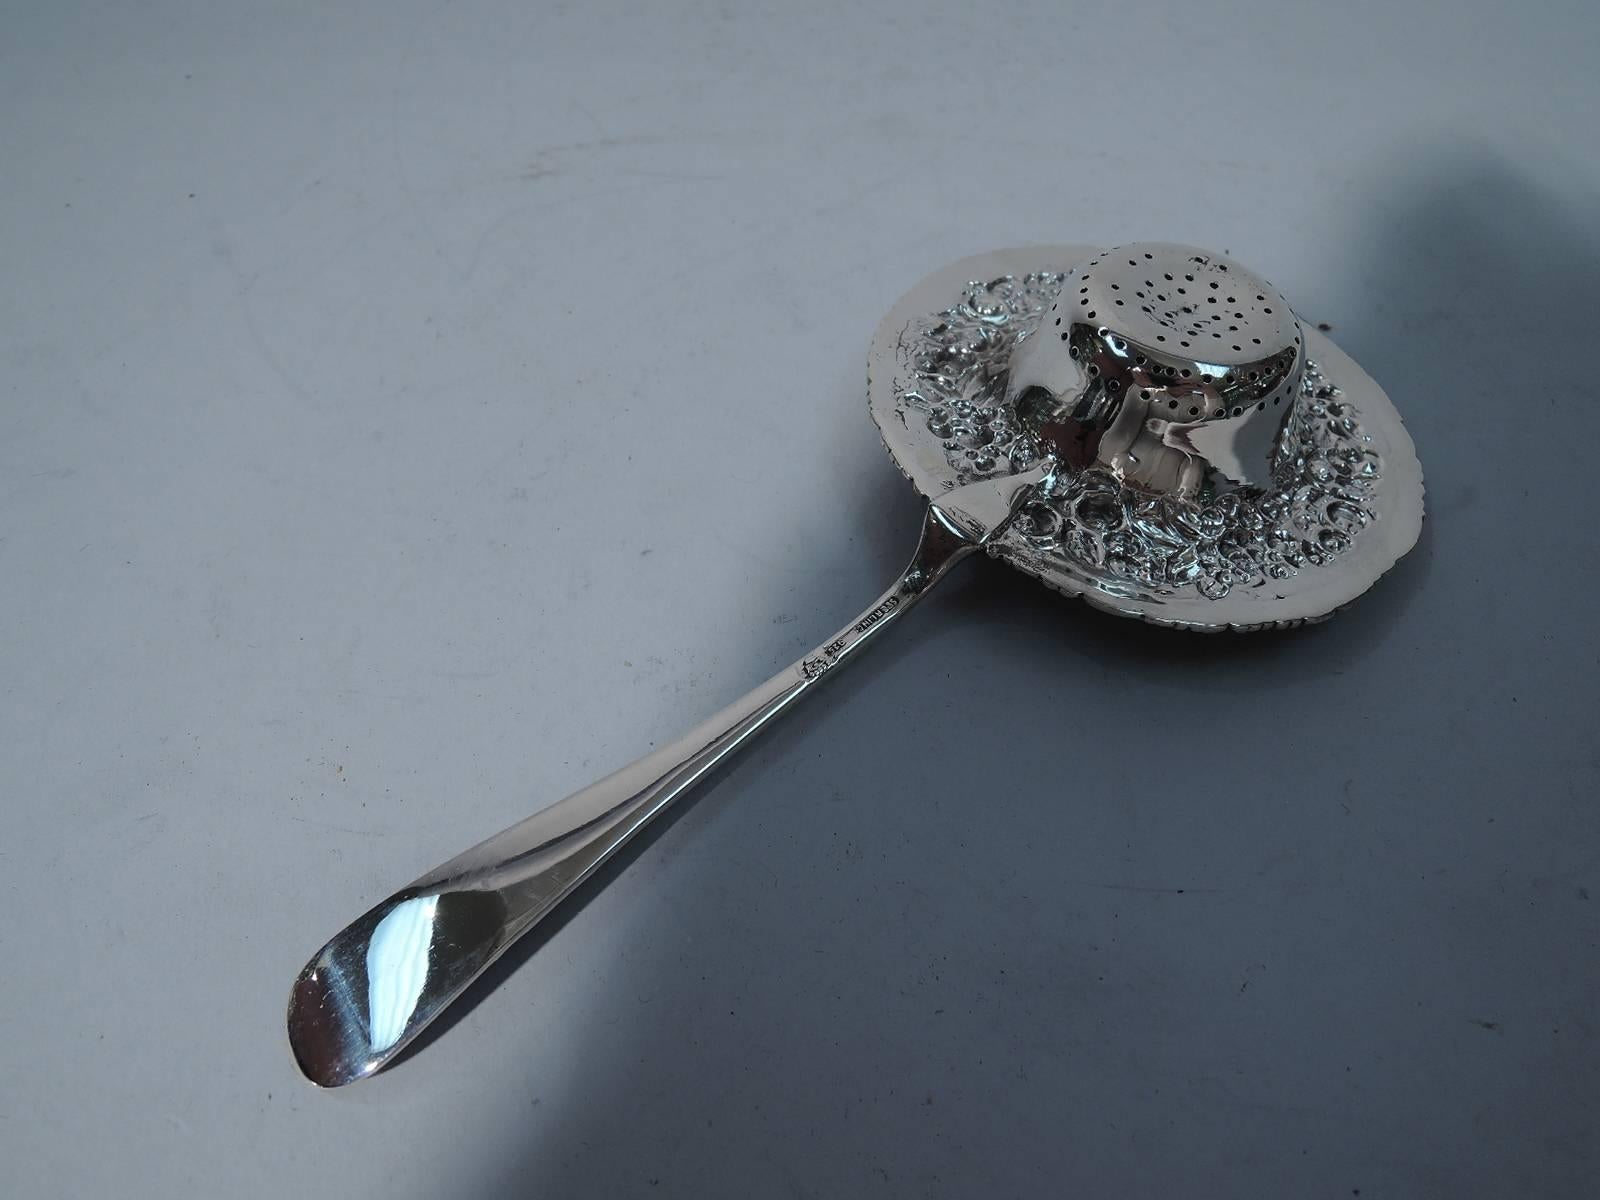 Great quality sterling silver tea strainer. All-over floral repousse and gilt and pierced bowl. Hallmarked “sterling-925” and crown for the Baltimore Sterling Silver Co., which was later the Stieff Co. Excellent condition and nice